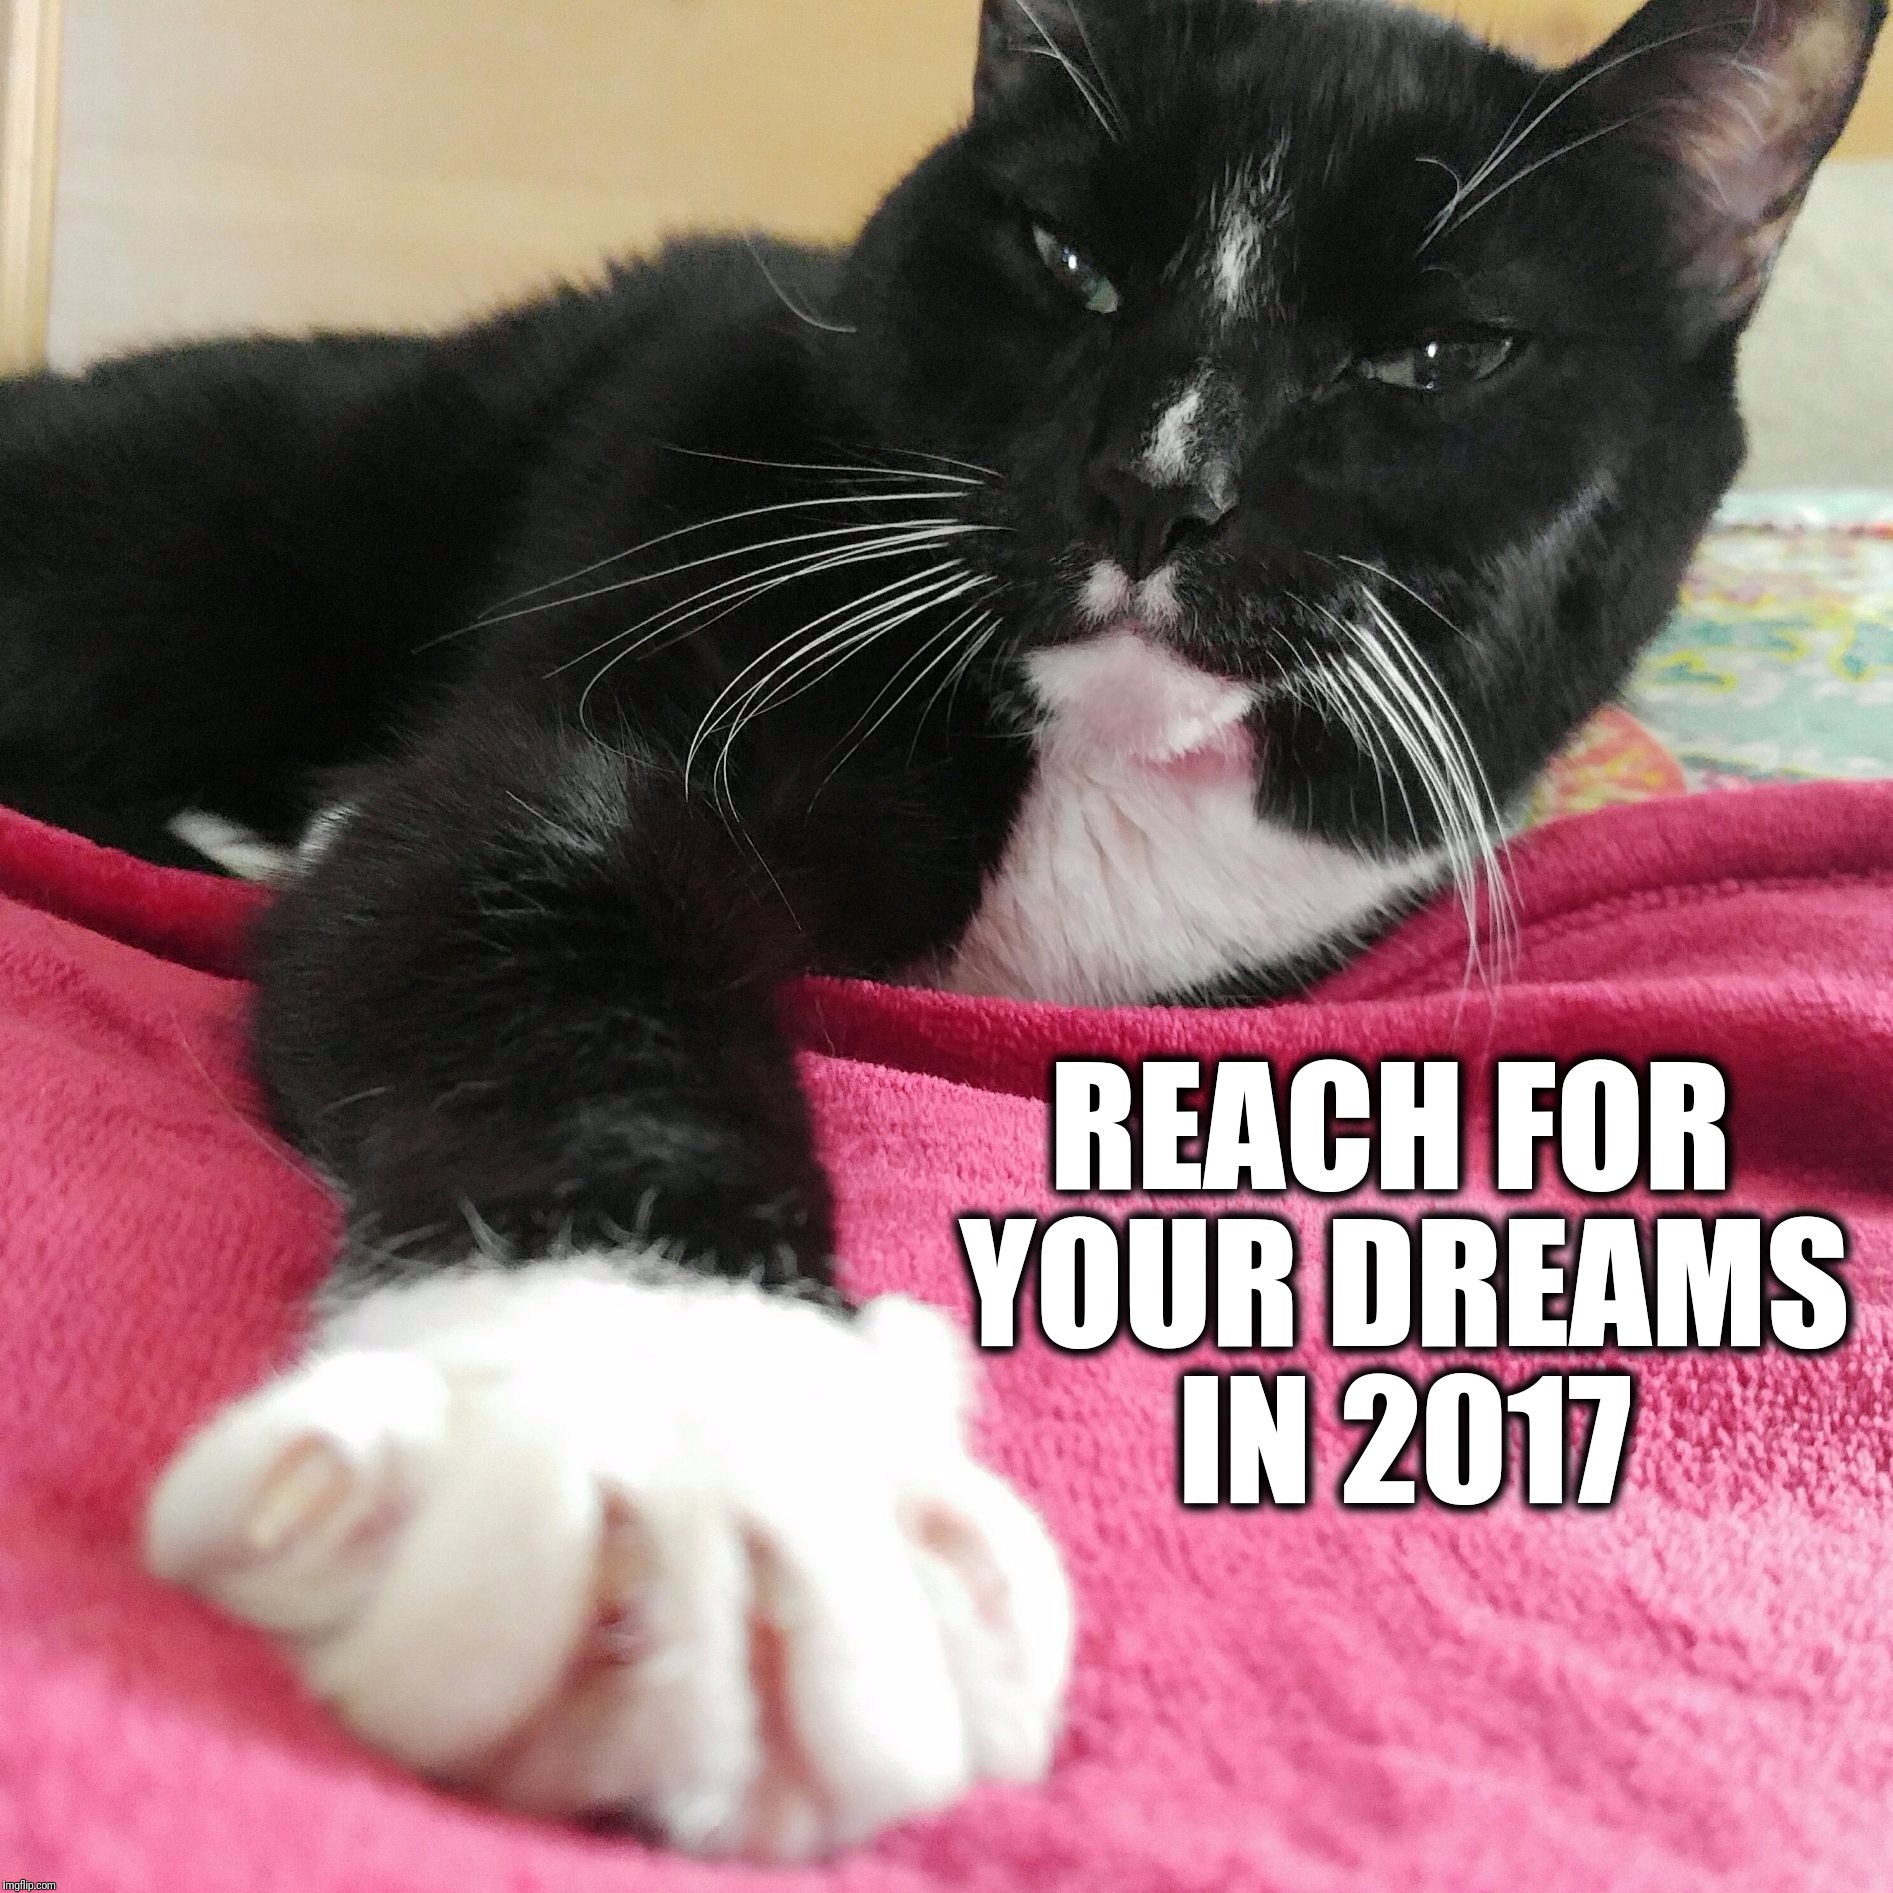 Reach for your dreams in 2017  |  REACH FOR YOUR DREAMS IN 2017 | image tagged in bert the cat,2017,new years 2017,reach for your dreams,inspirational,memes | made w/ Imgflip meme maker